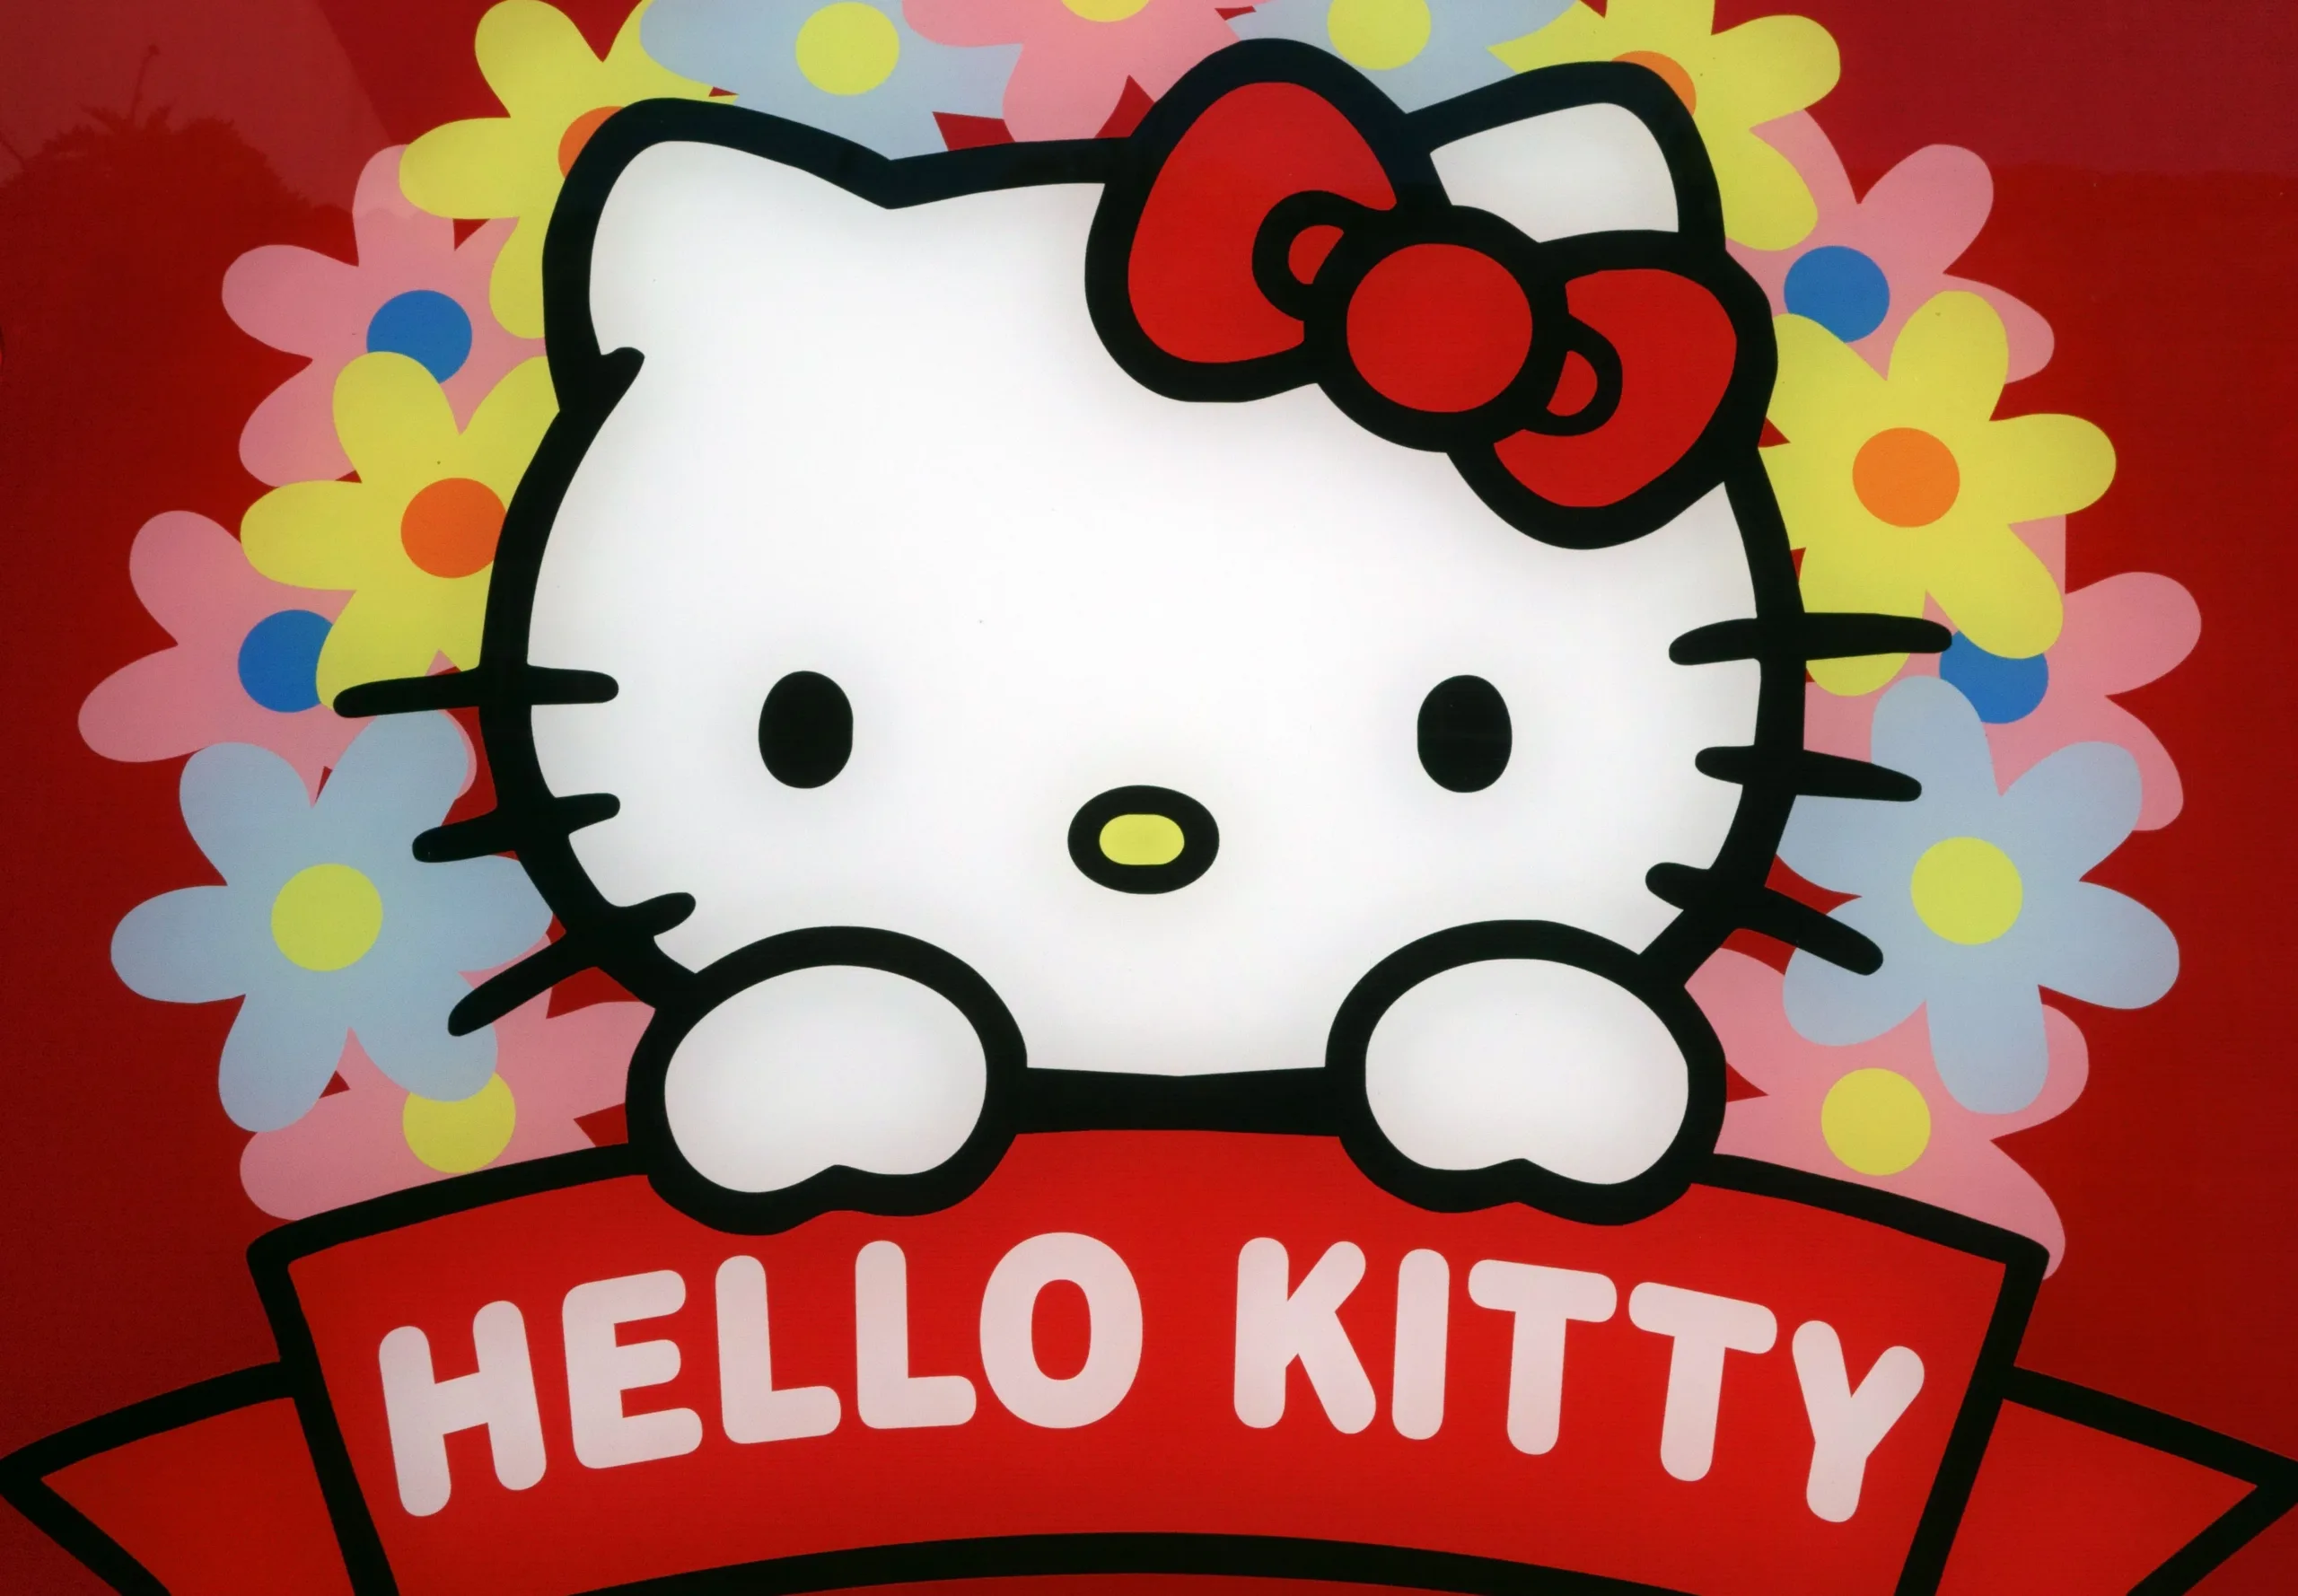 Hello Kitty peeking out over a sign that says Hello Kitty